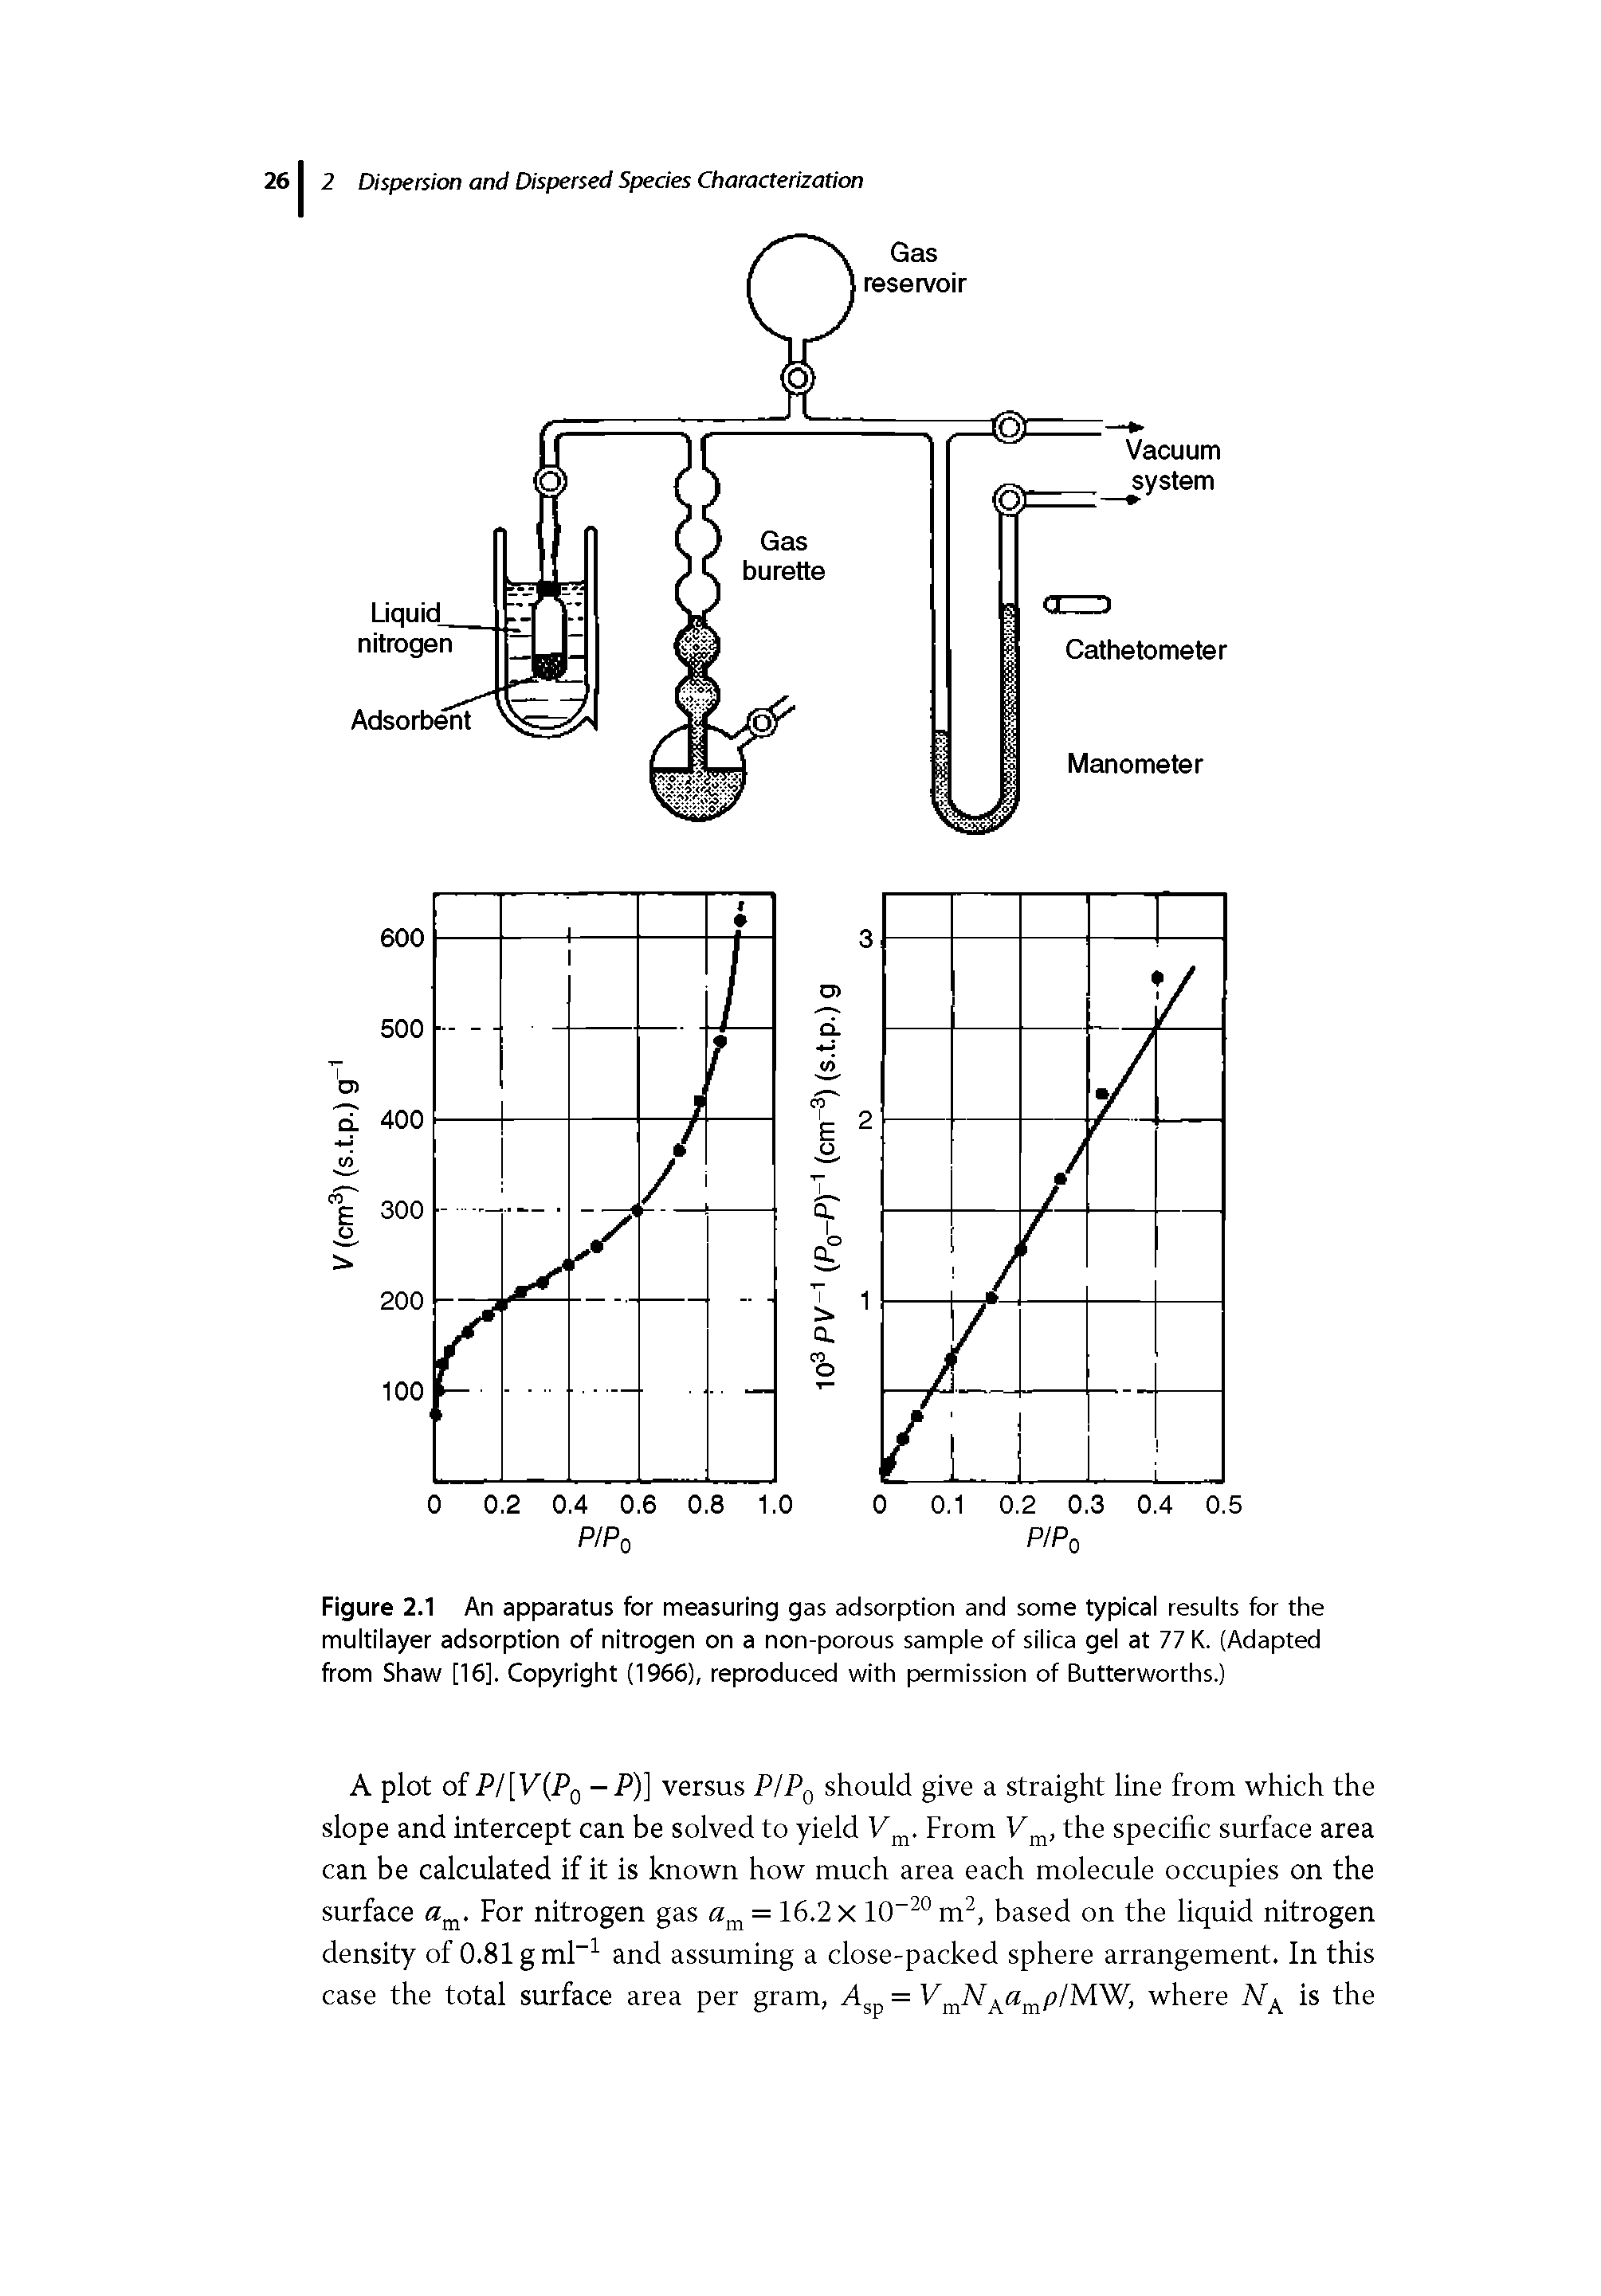 Figure 2.1 An apparatus for measuring gas adsorption and some typicai resuits for the multilayer adsorption of nitrogen on a non-porous sample of silica gel at 77 K. (Adapted from Shaw [16]. Copyright (1966), reproduced with permission of Butterworths.)...